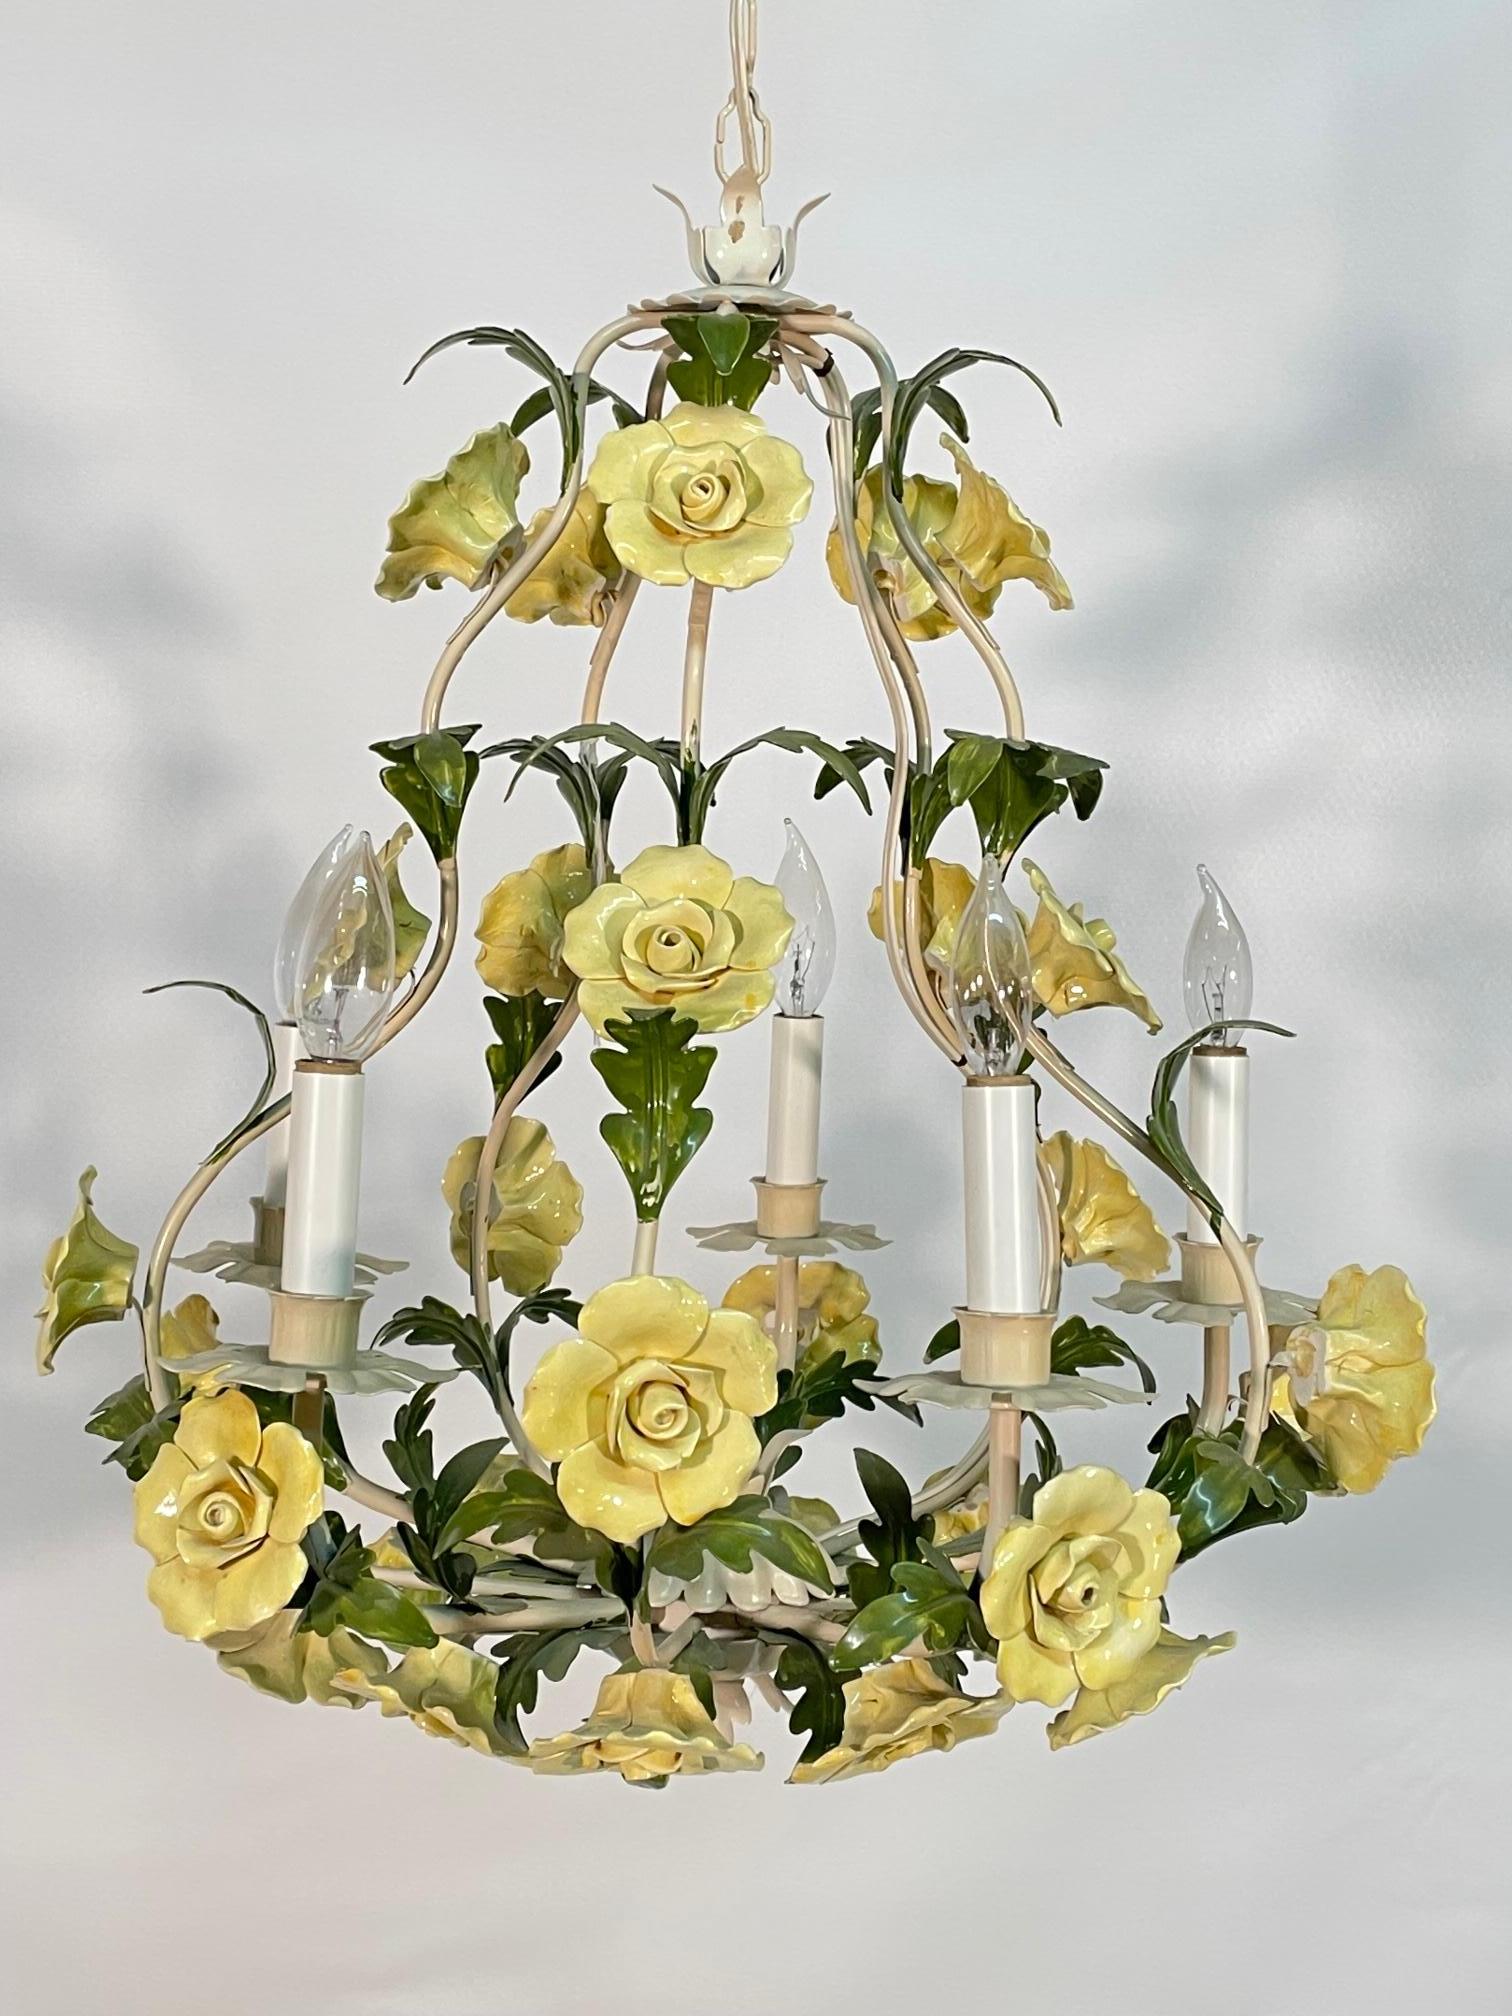 Vintage tole metal chandelier features ceramic hand painted roses and metal leaves. Believed to be made in Italy, but no markings. Very good condition with minor imperfections consistent with age.
Shipping to most of the continental US is $200 to